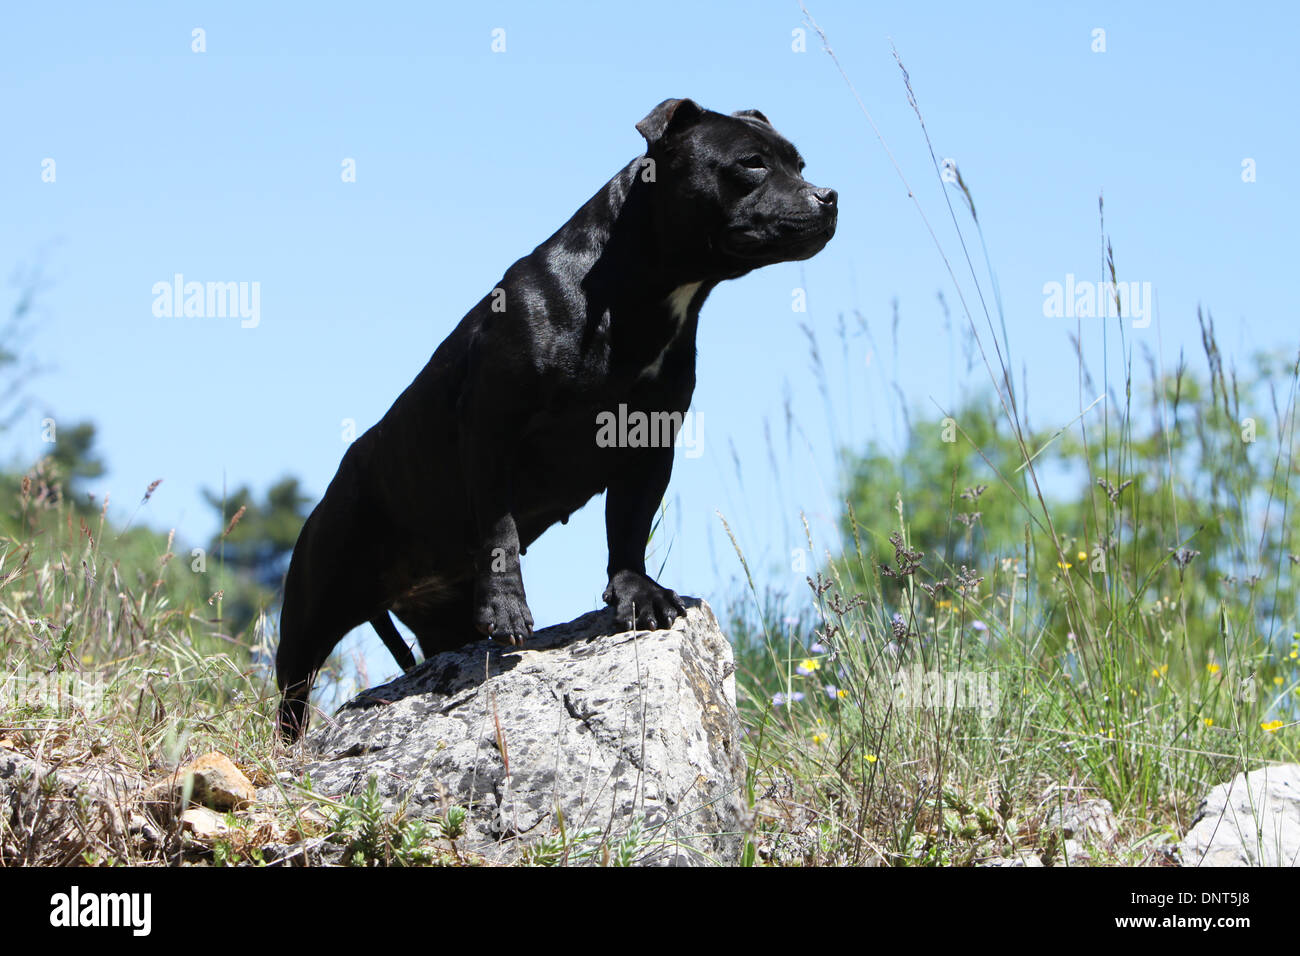 dog Staffordshire Bull Terrier / Staffie  adult standing on a rock Stock Photo